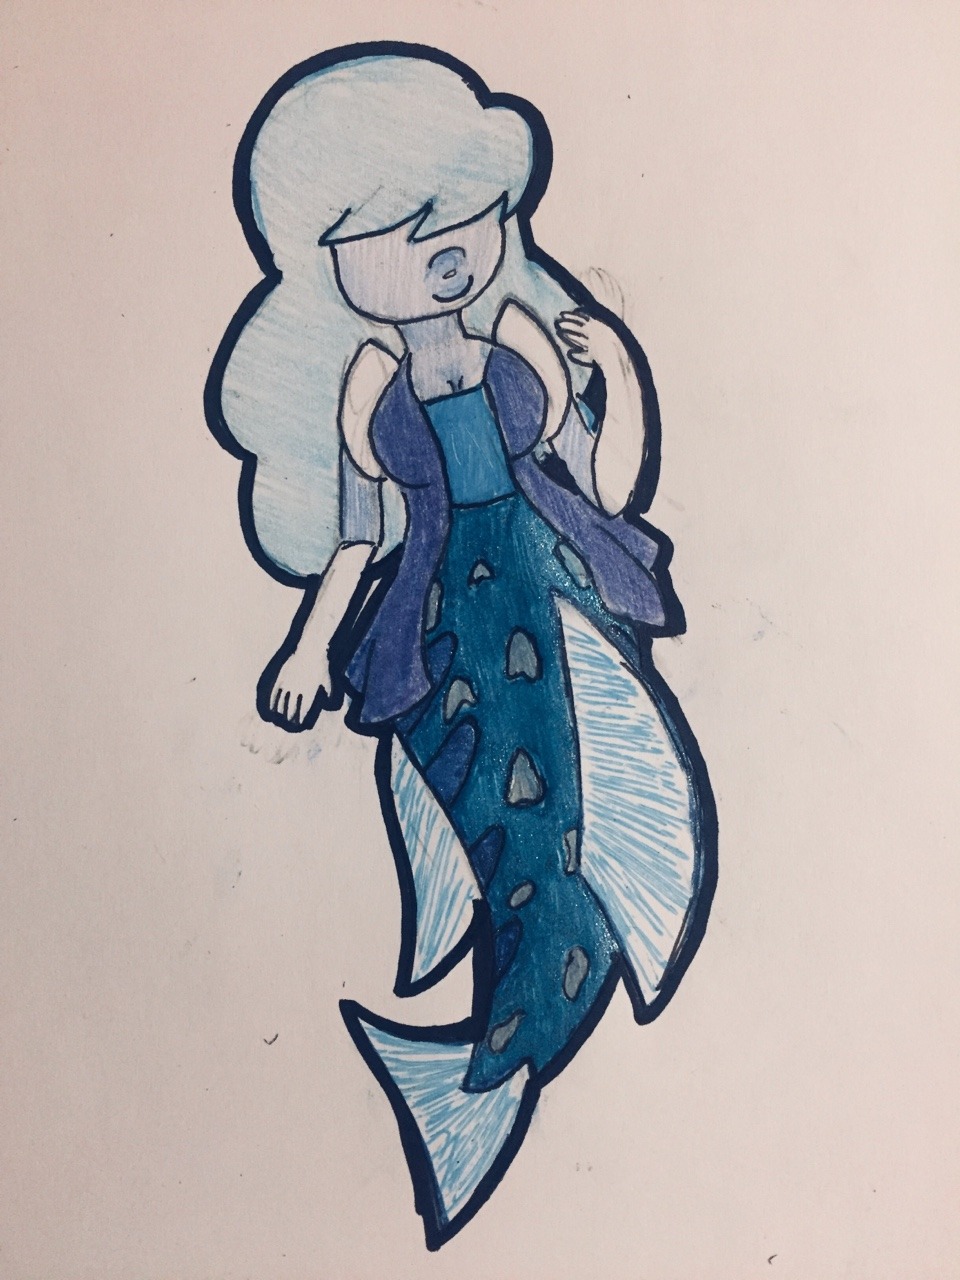 DAY THREE: GEMSTONE It’s Sapphire from Steven Universe! Based off the Star Sapphire Fish